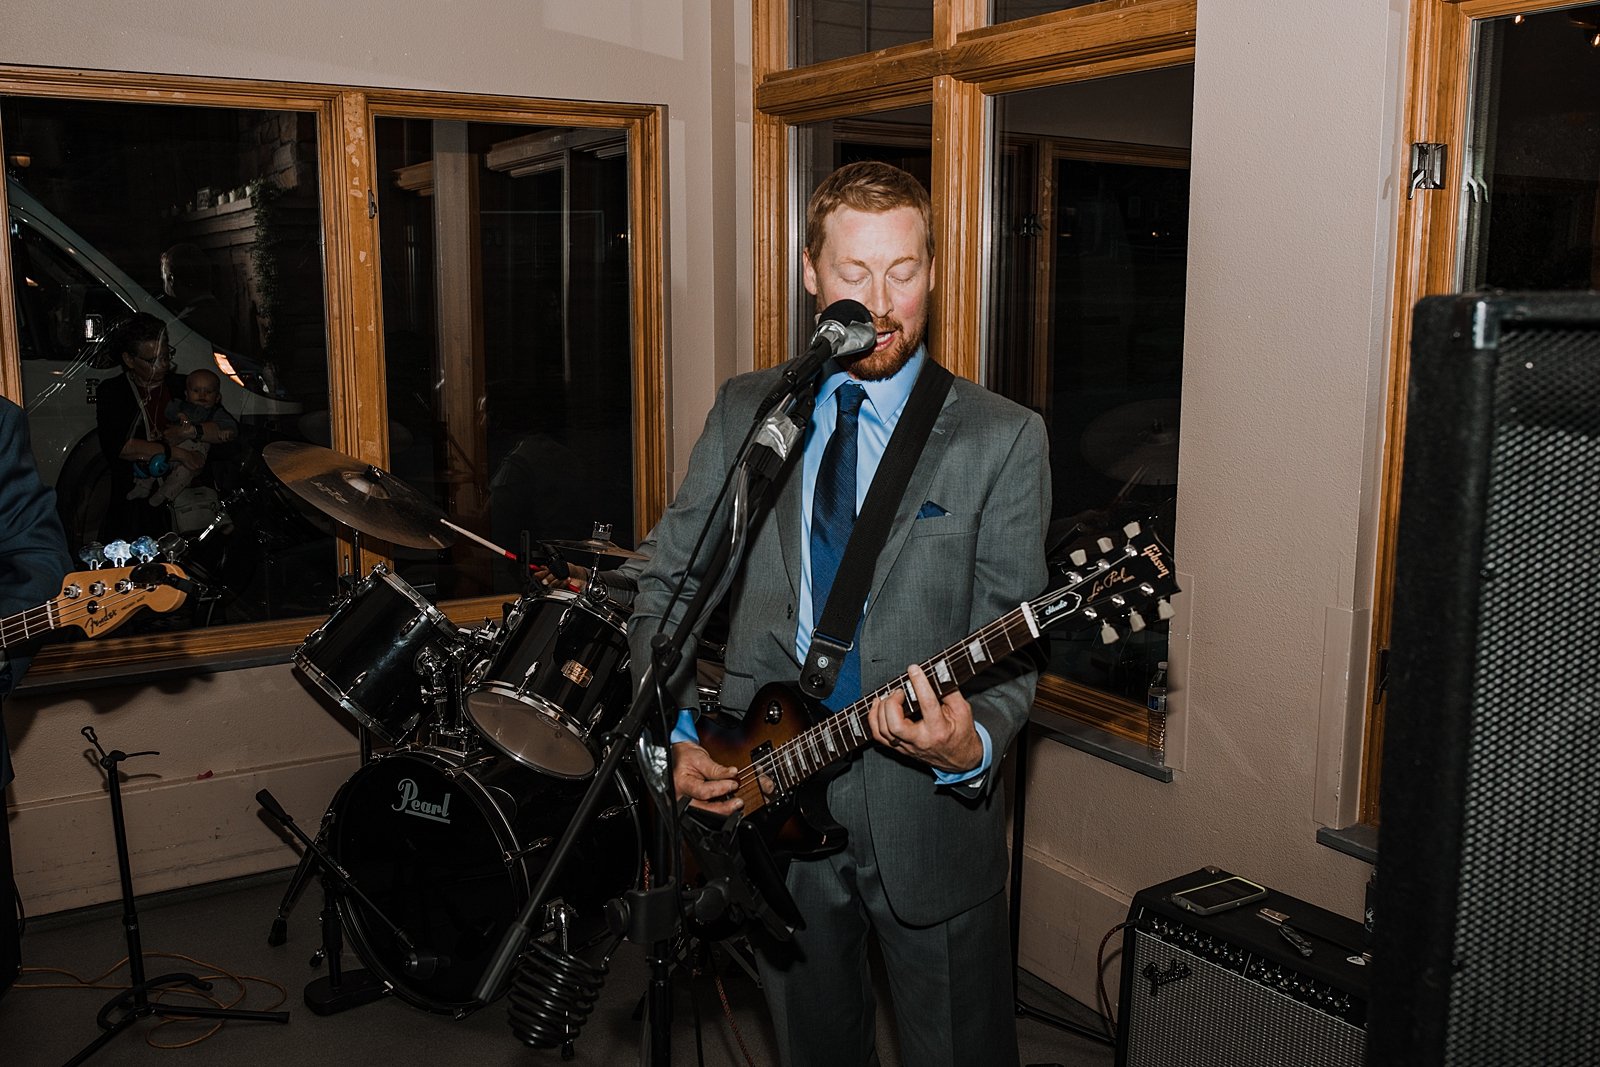 groom playing with the band, carter park pavilion dance floor, carter park pavilion dance reception, breckenridge historic district wedding reception, breckenridge wedding photographer